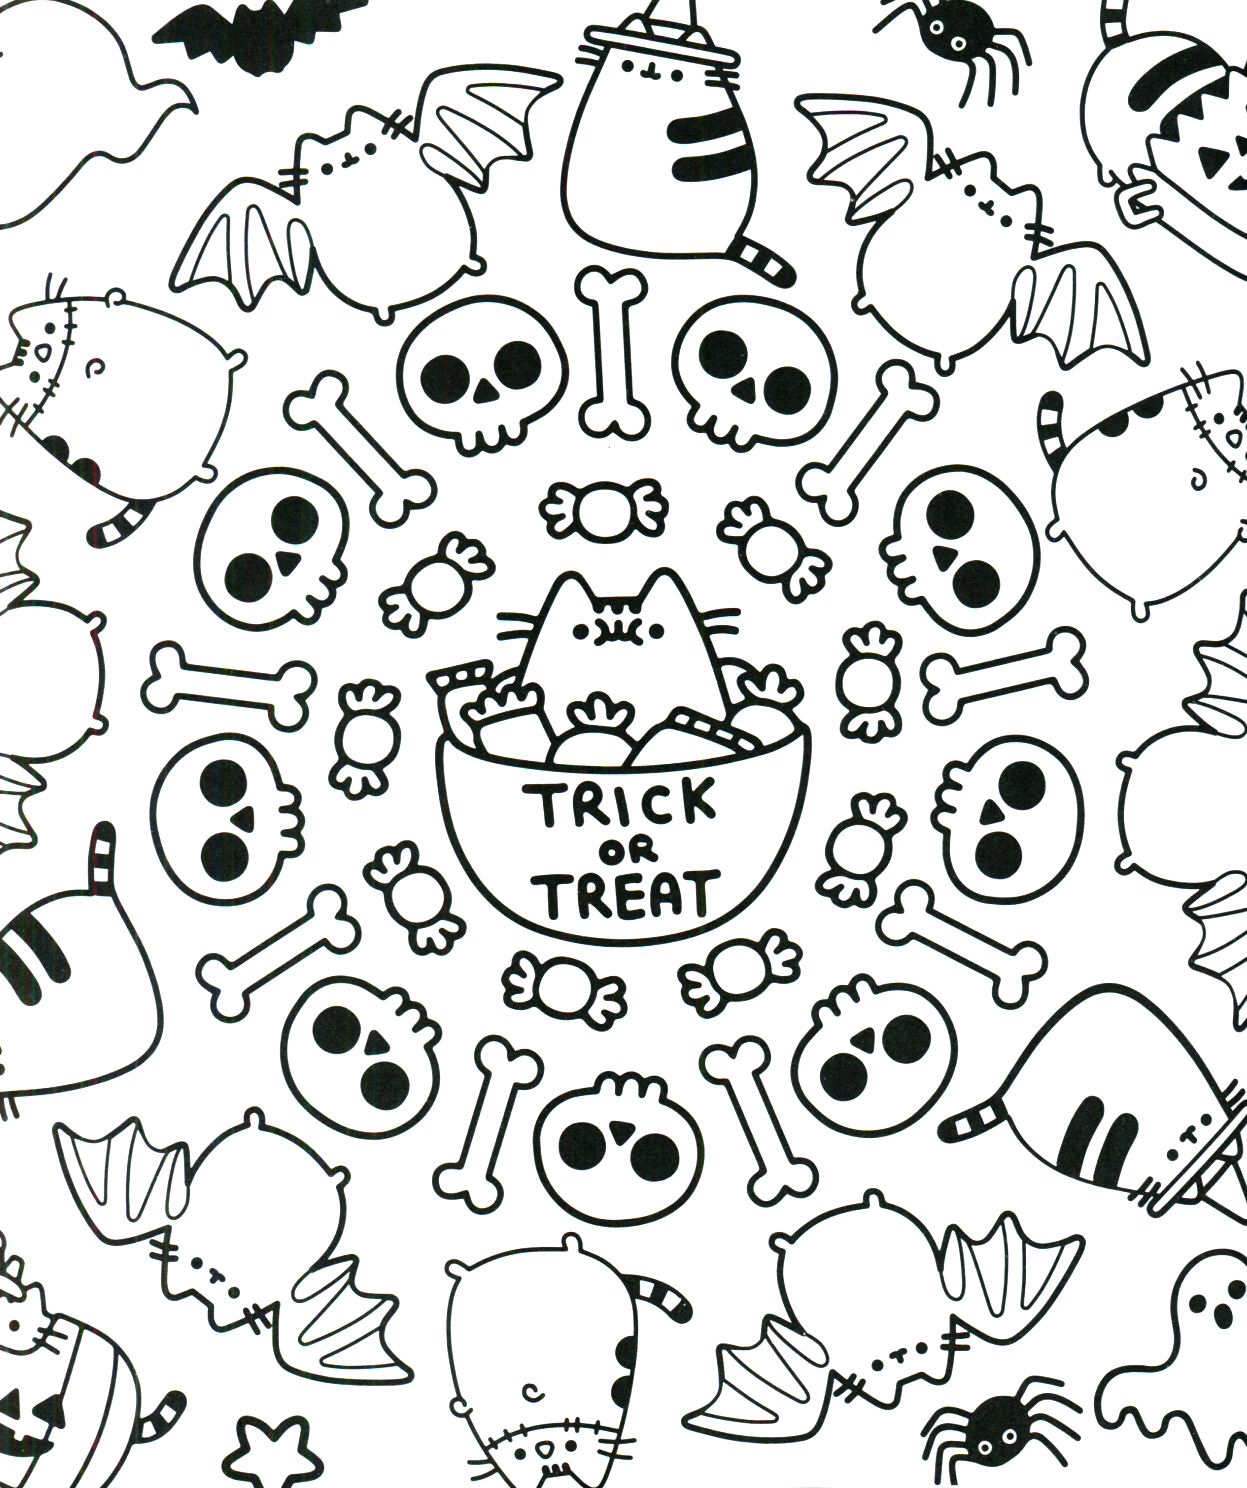 Cute Halloween Coloring Pages - Best Coloring Pages For Kids - Coloring